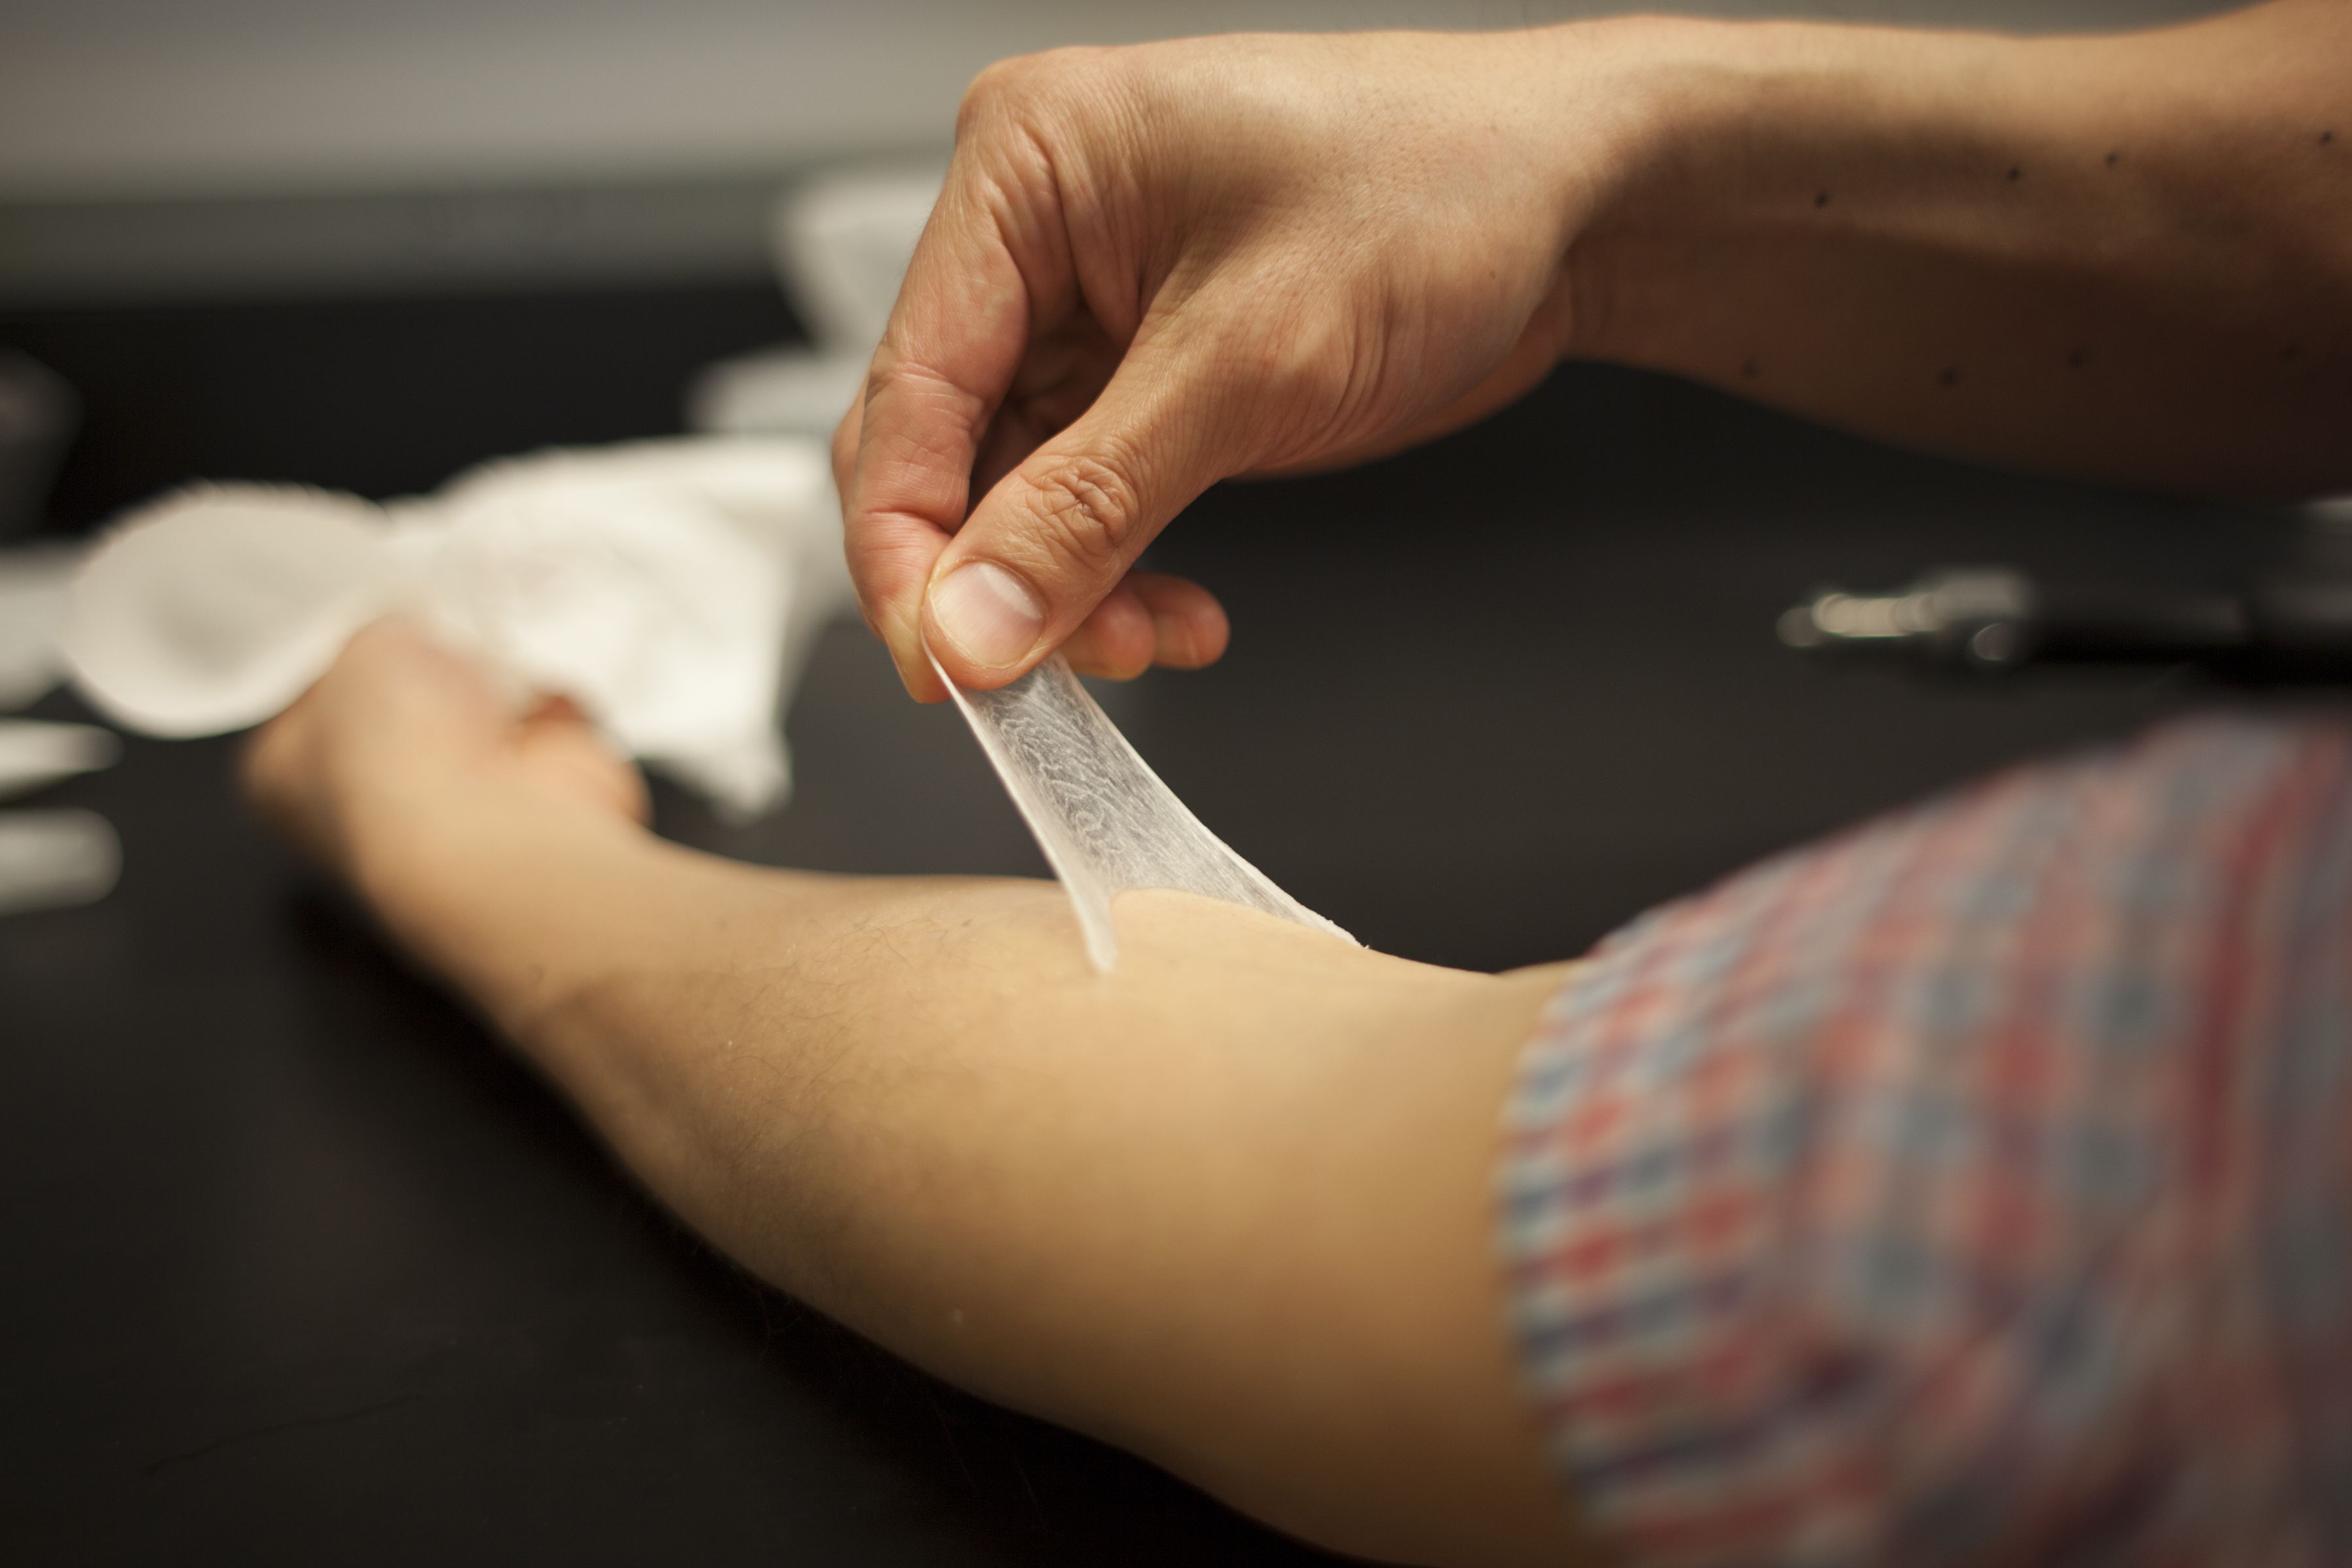 New material temporarily tightens skin, MIT News